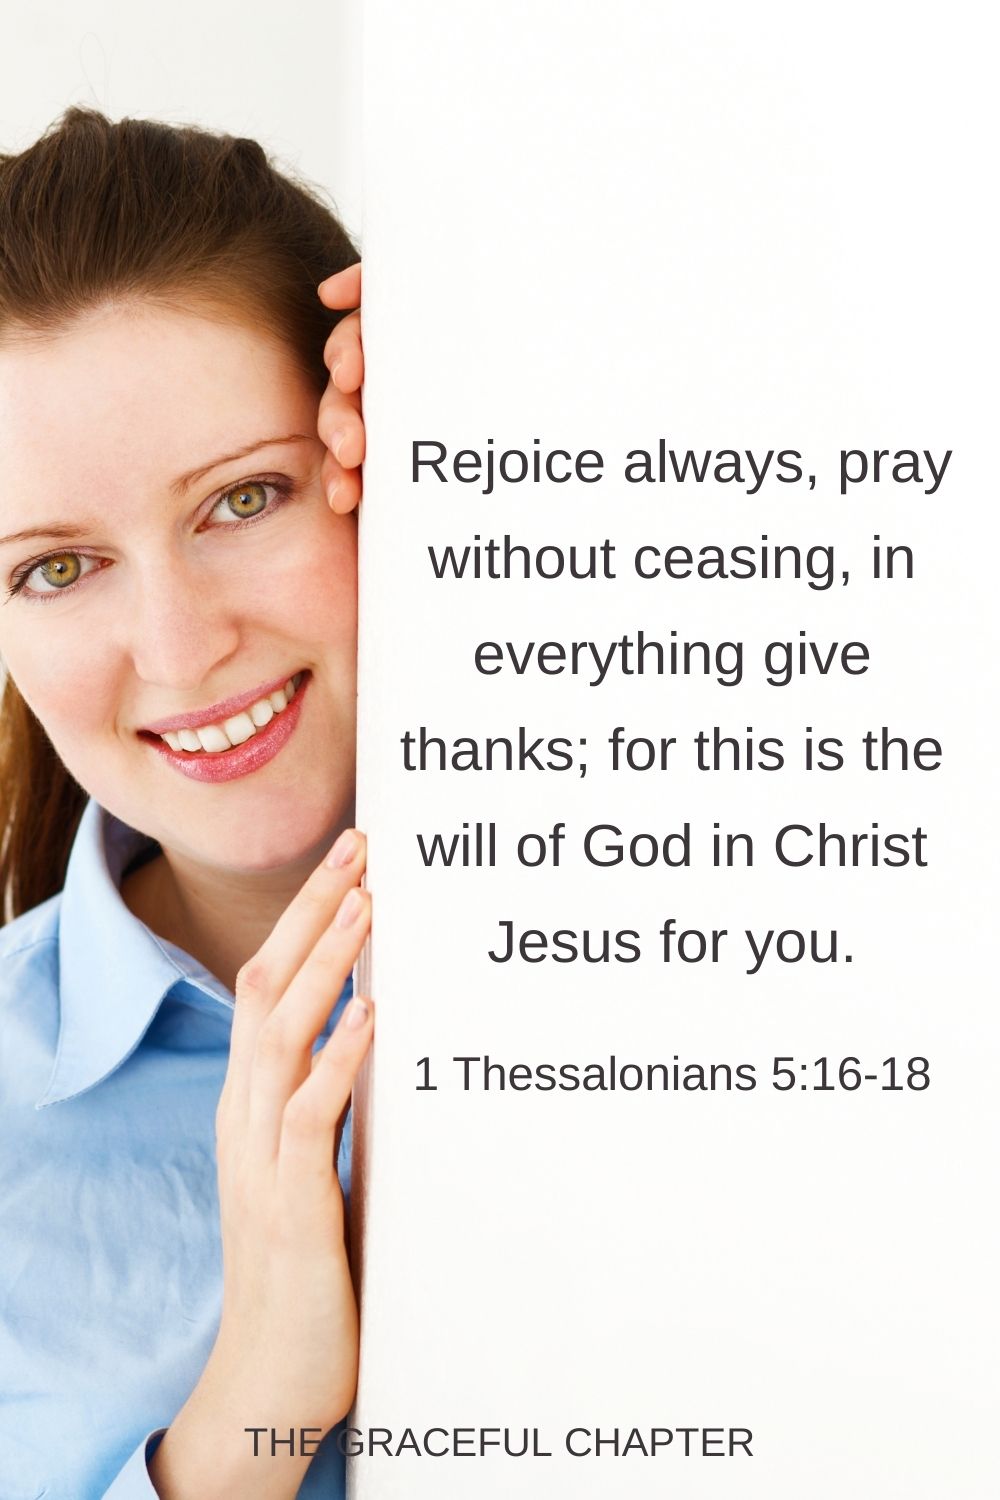  Rejoice always, pray without ceasing, in everything give thanks; for this is the will of God in Christ Jesus for you. 1 Thessalonians 5:16-18